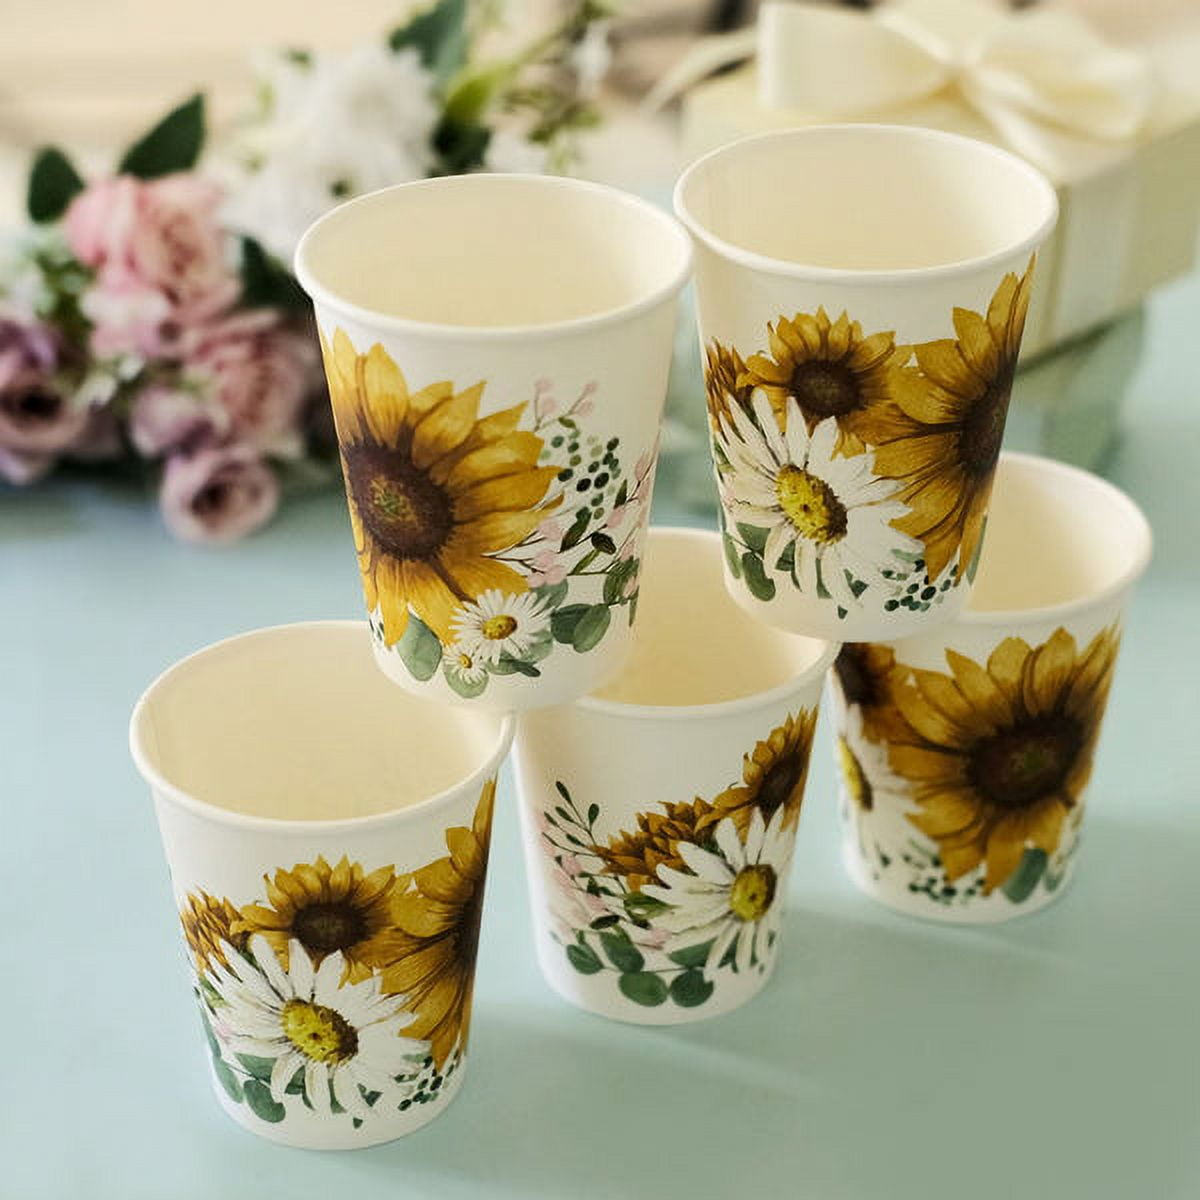 Irenare 96 Pack Blue and White Flower Disposable Coffee Cups with Lids 16  oz Blue Floral Paper Cups Chinoiserie Floral Pattern Paper Cups for Office